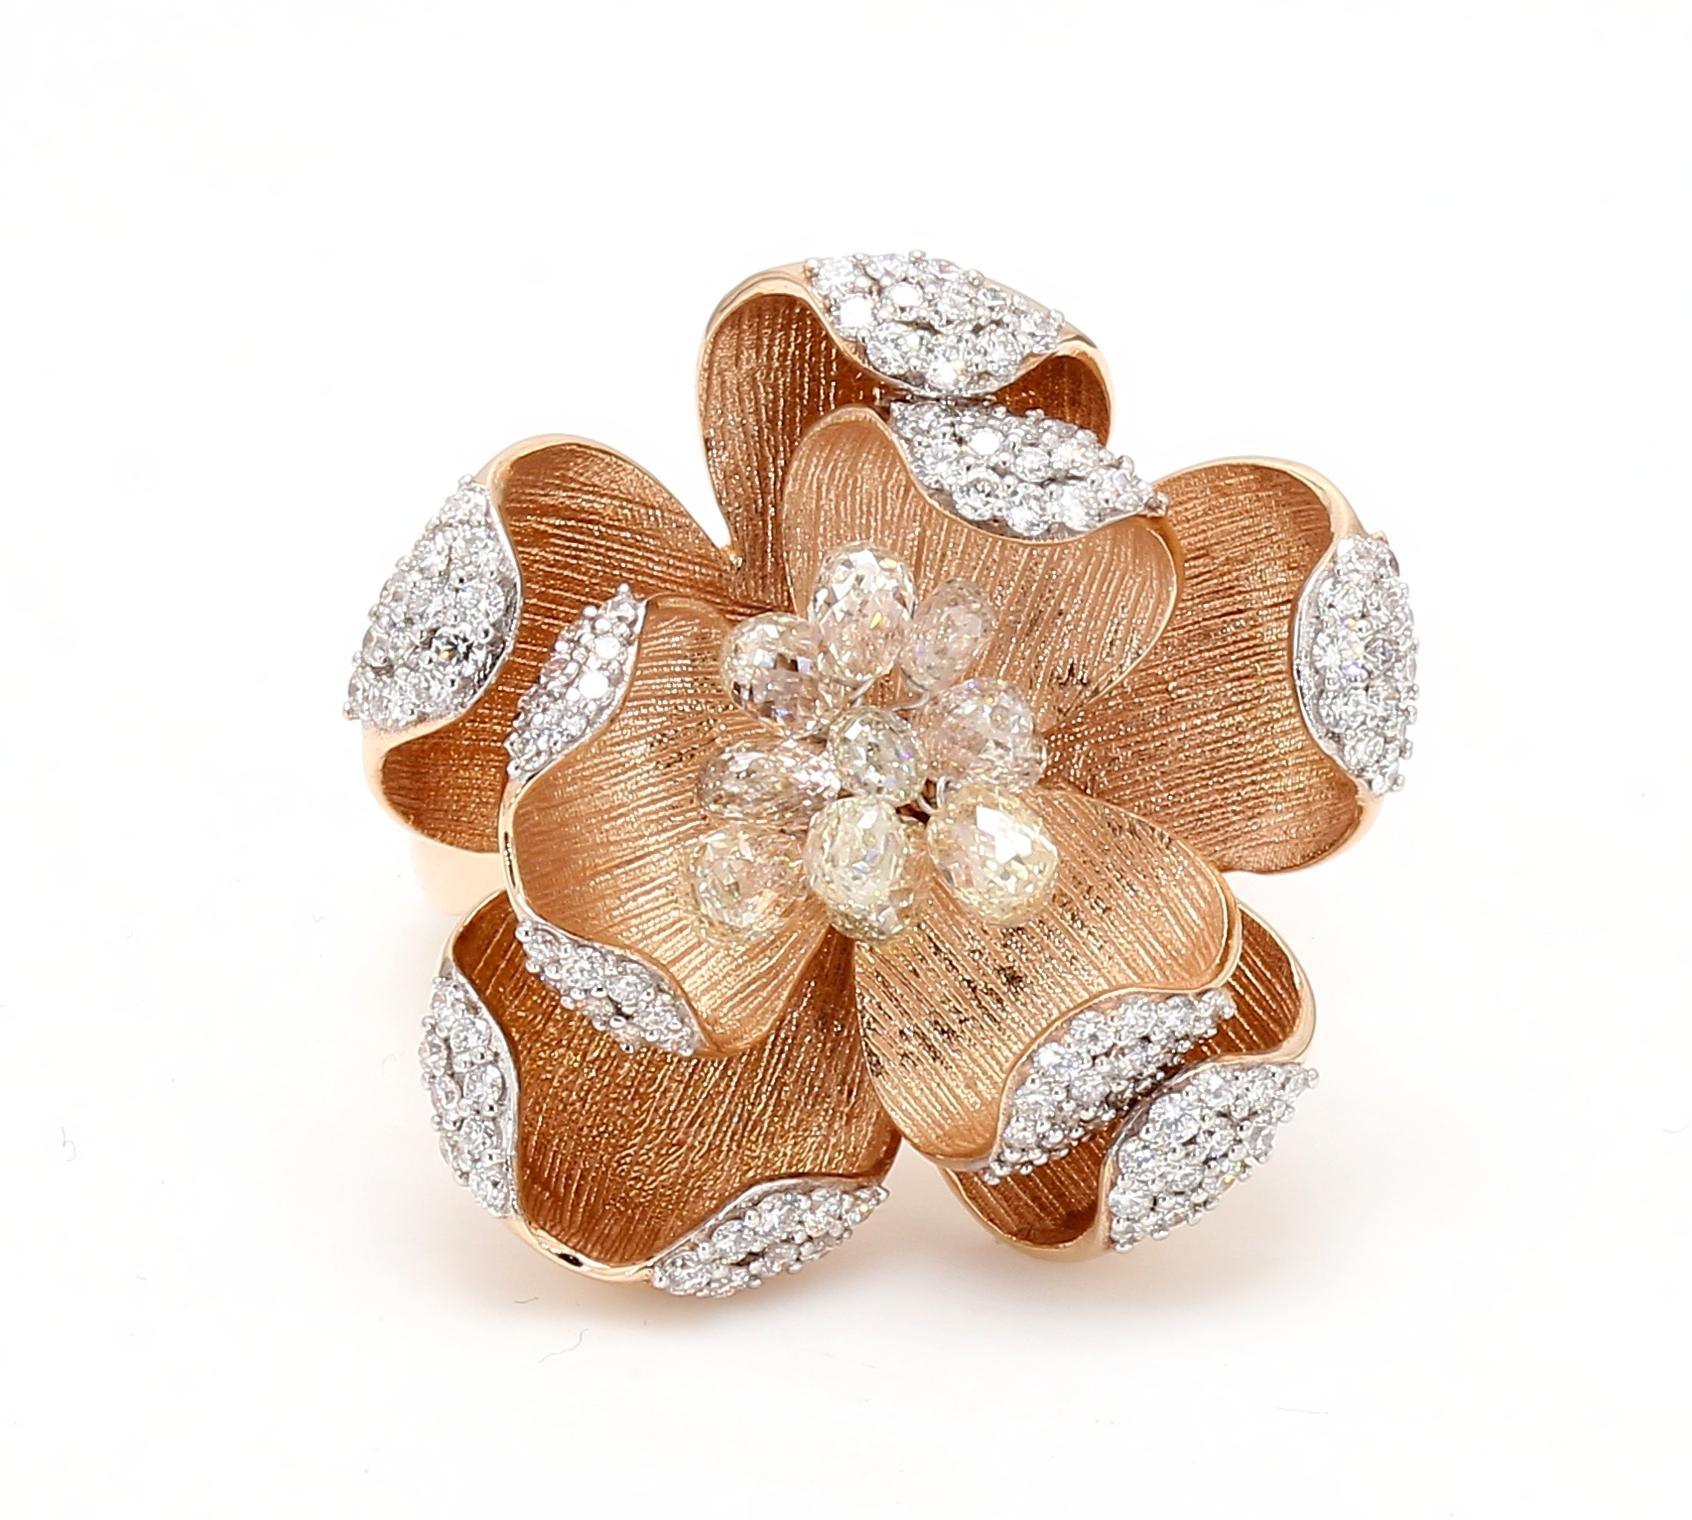 PANIM 18K Rose Gold Diamond Briolette Floral Ring

The PANIM 18K Rose Gold Diamond Briolette Ring is a truly exquisite piece of jewelry that embodies timeless beauty. Crafted with precision and care, this ring showcases the perfect balance of